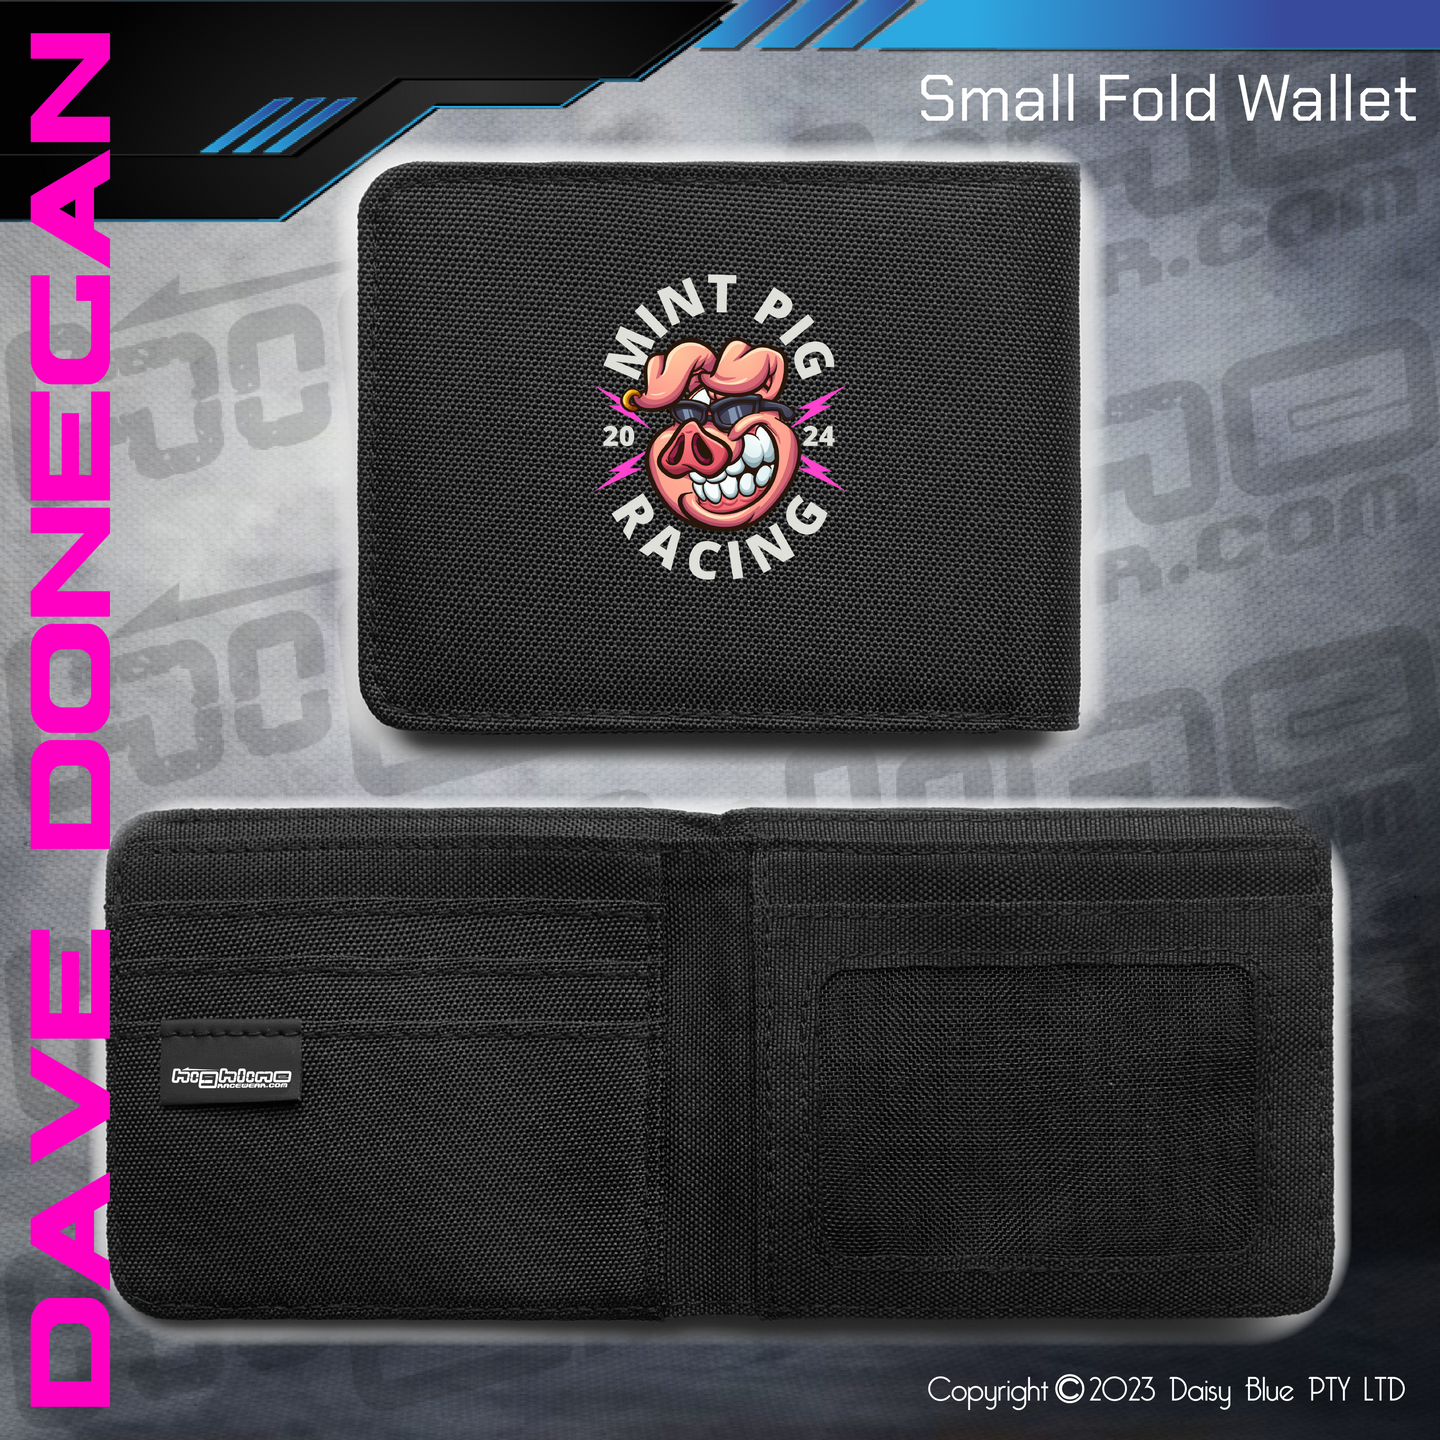 Compact Wallet - Mint Pig Streetie Revival